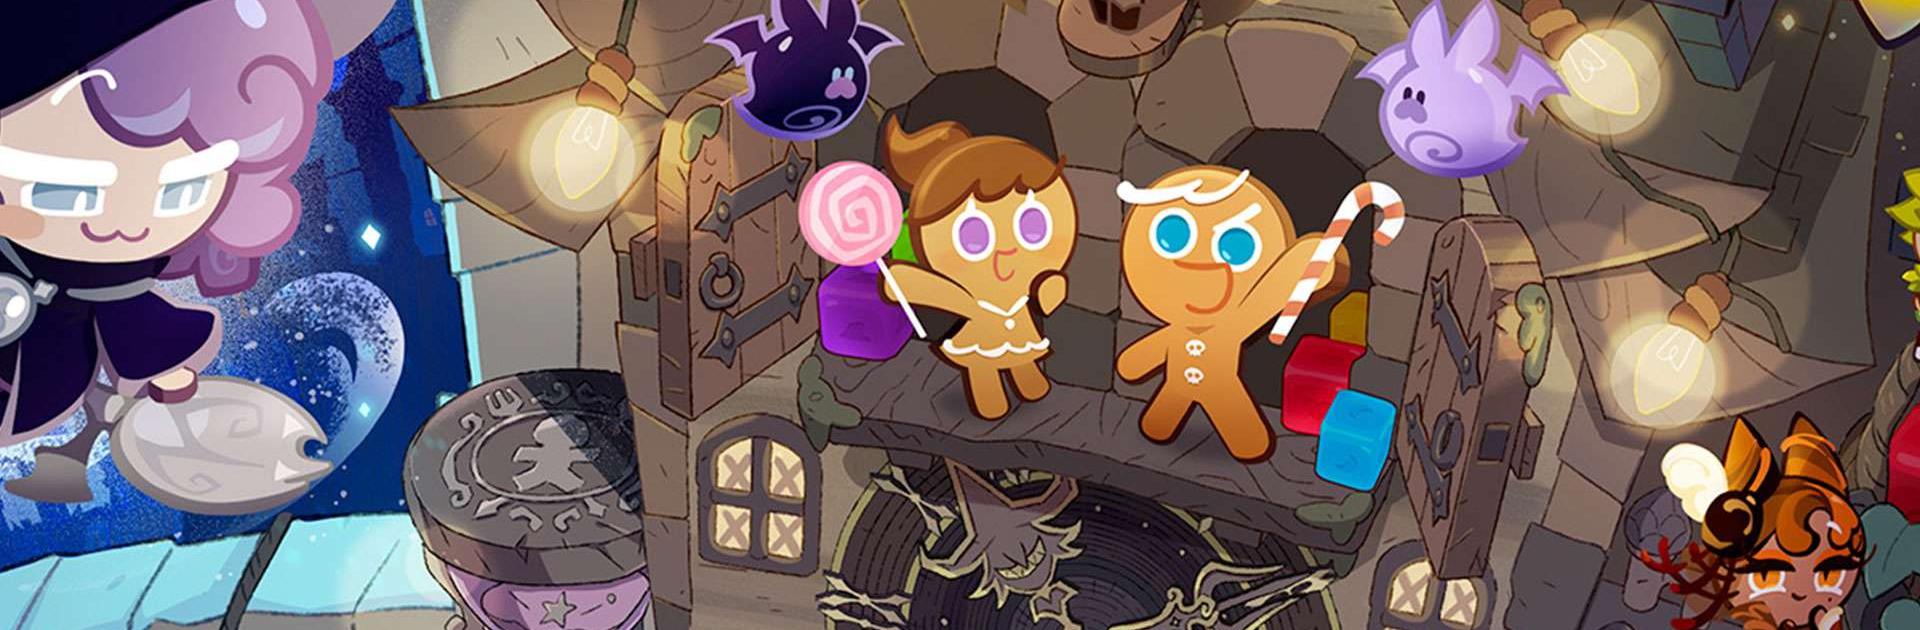 CookieRun: Witch’s Castle Beginner’s Guide